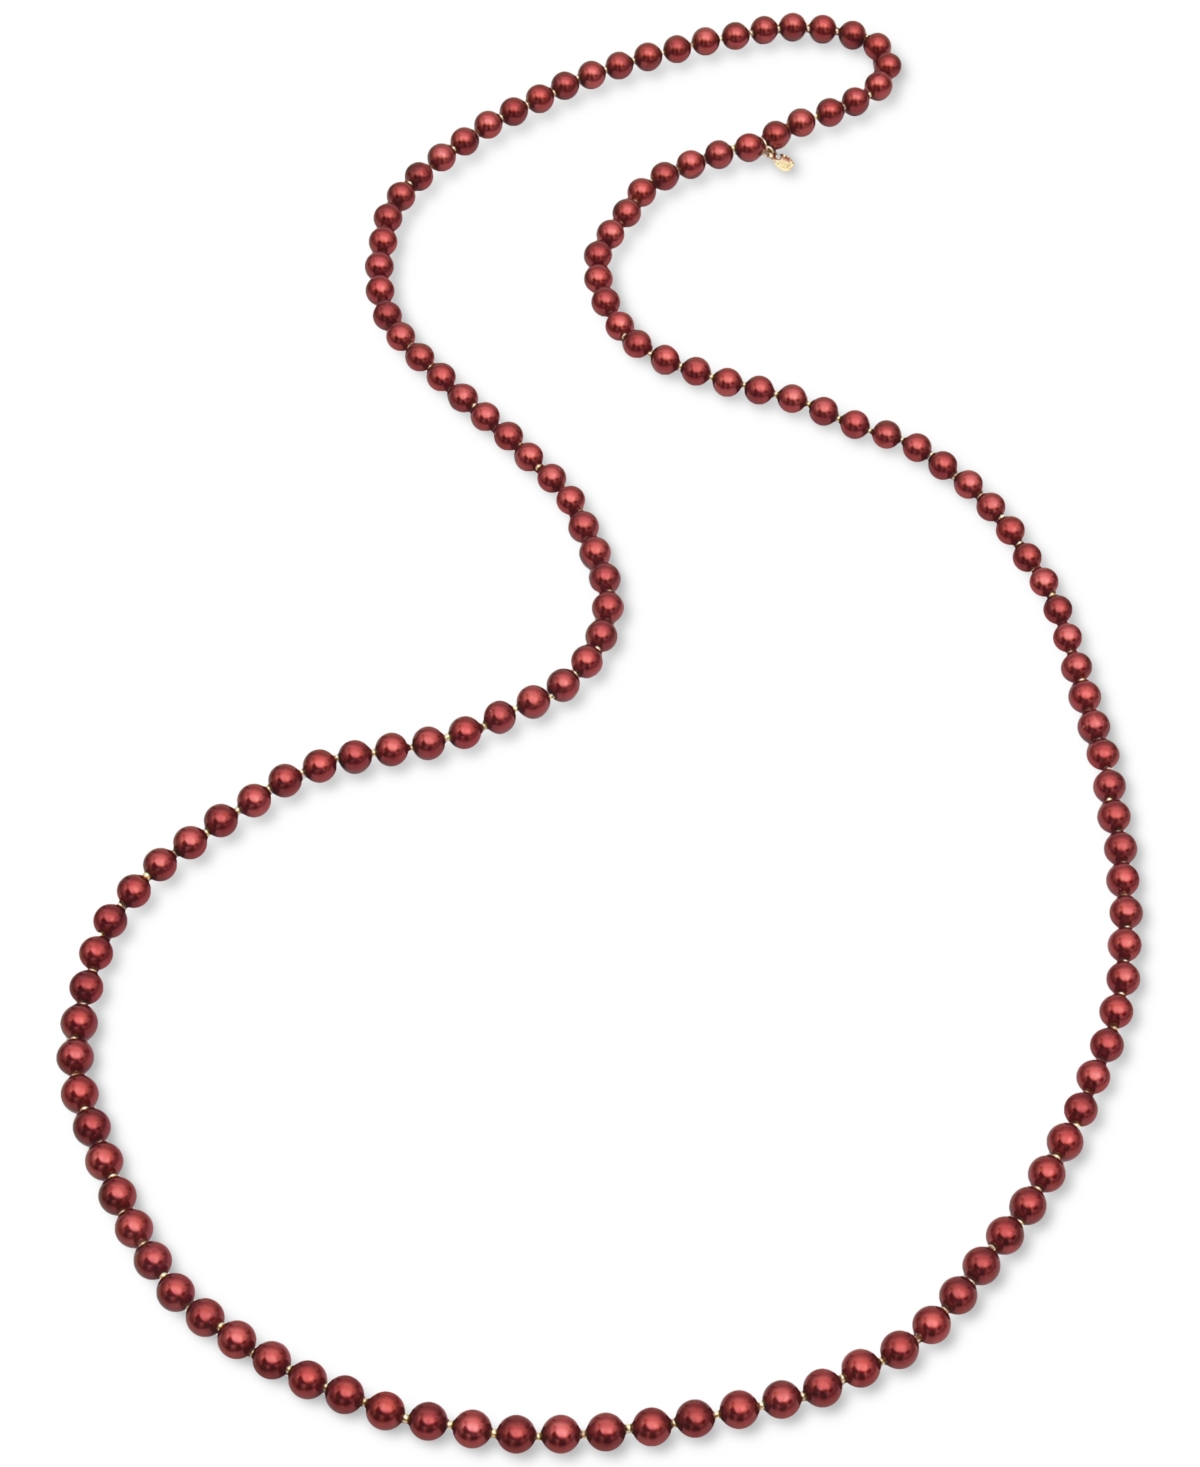 Gold-Tone Colored Imitation Pearl 60" Strand Necklace, Created for Macy's - Red